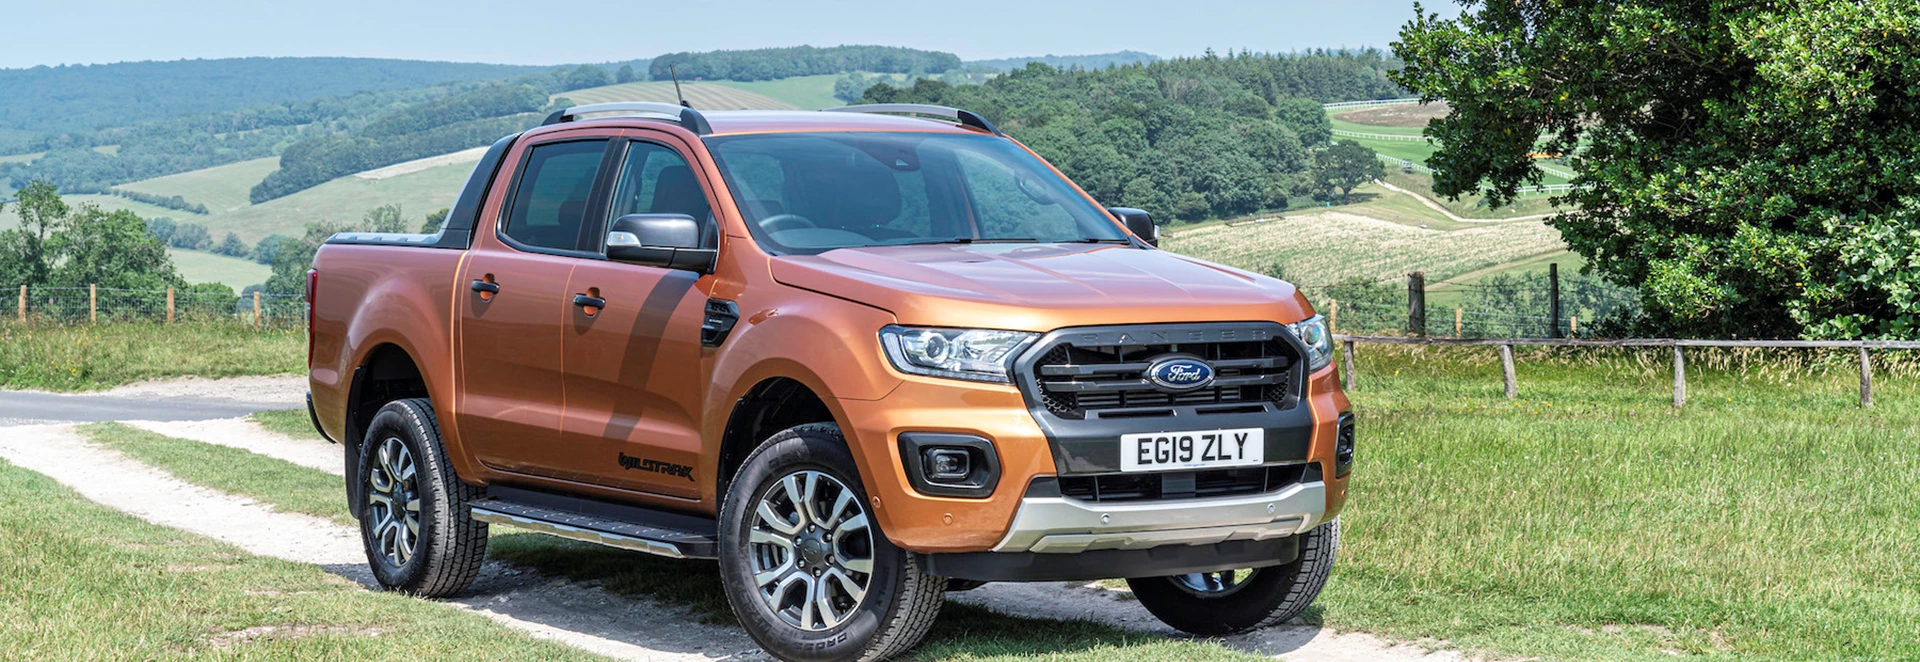 Buyer’s guide to the Ford Ranger 